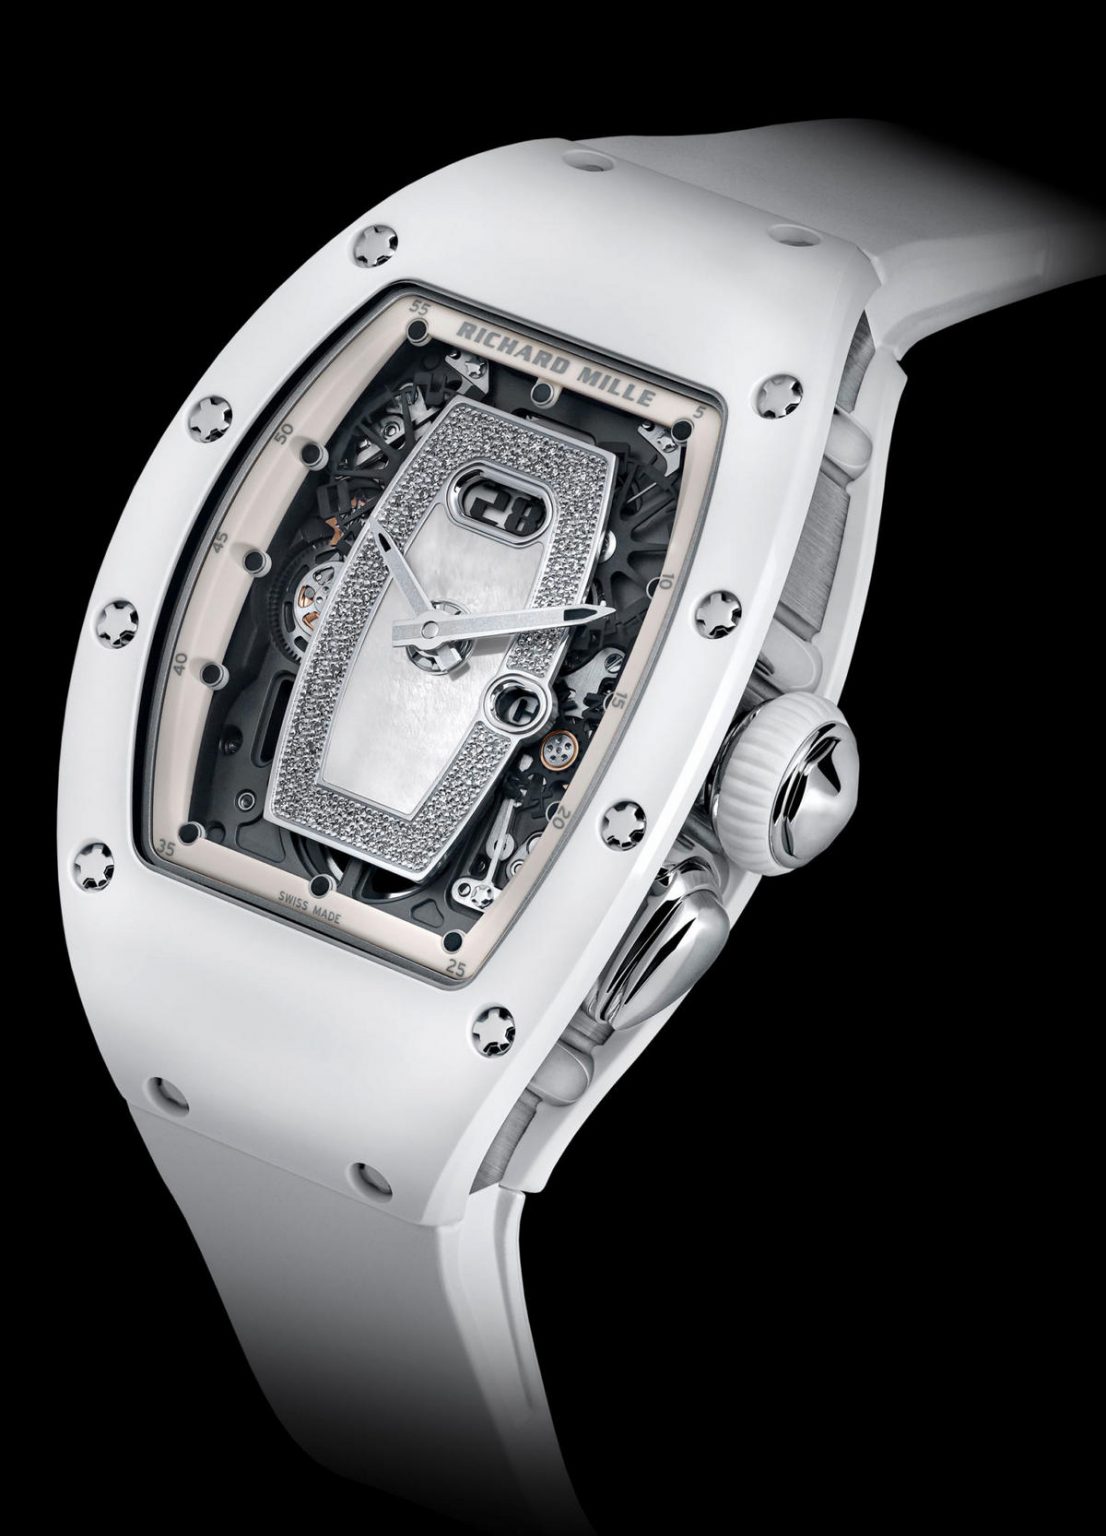 Richard Mille has introduced a 180,000 ladies watch in white ceramic